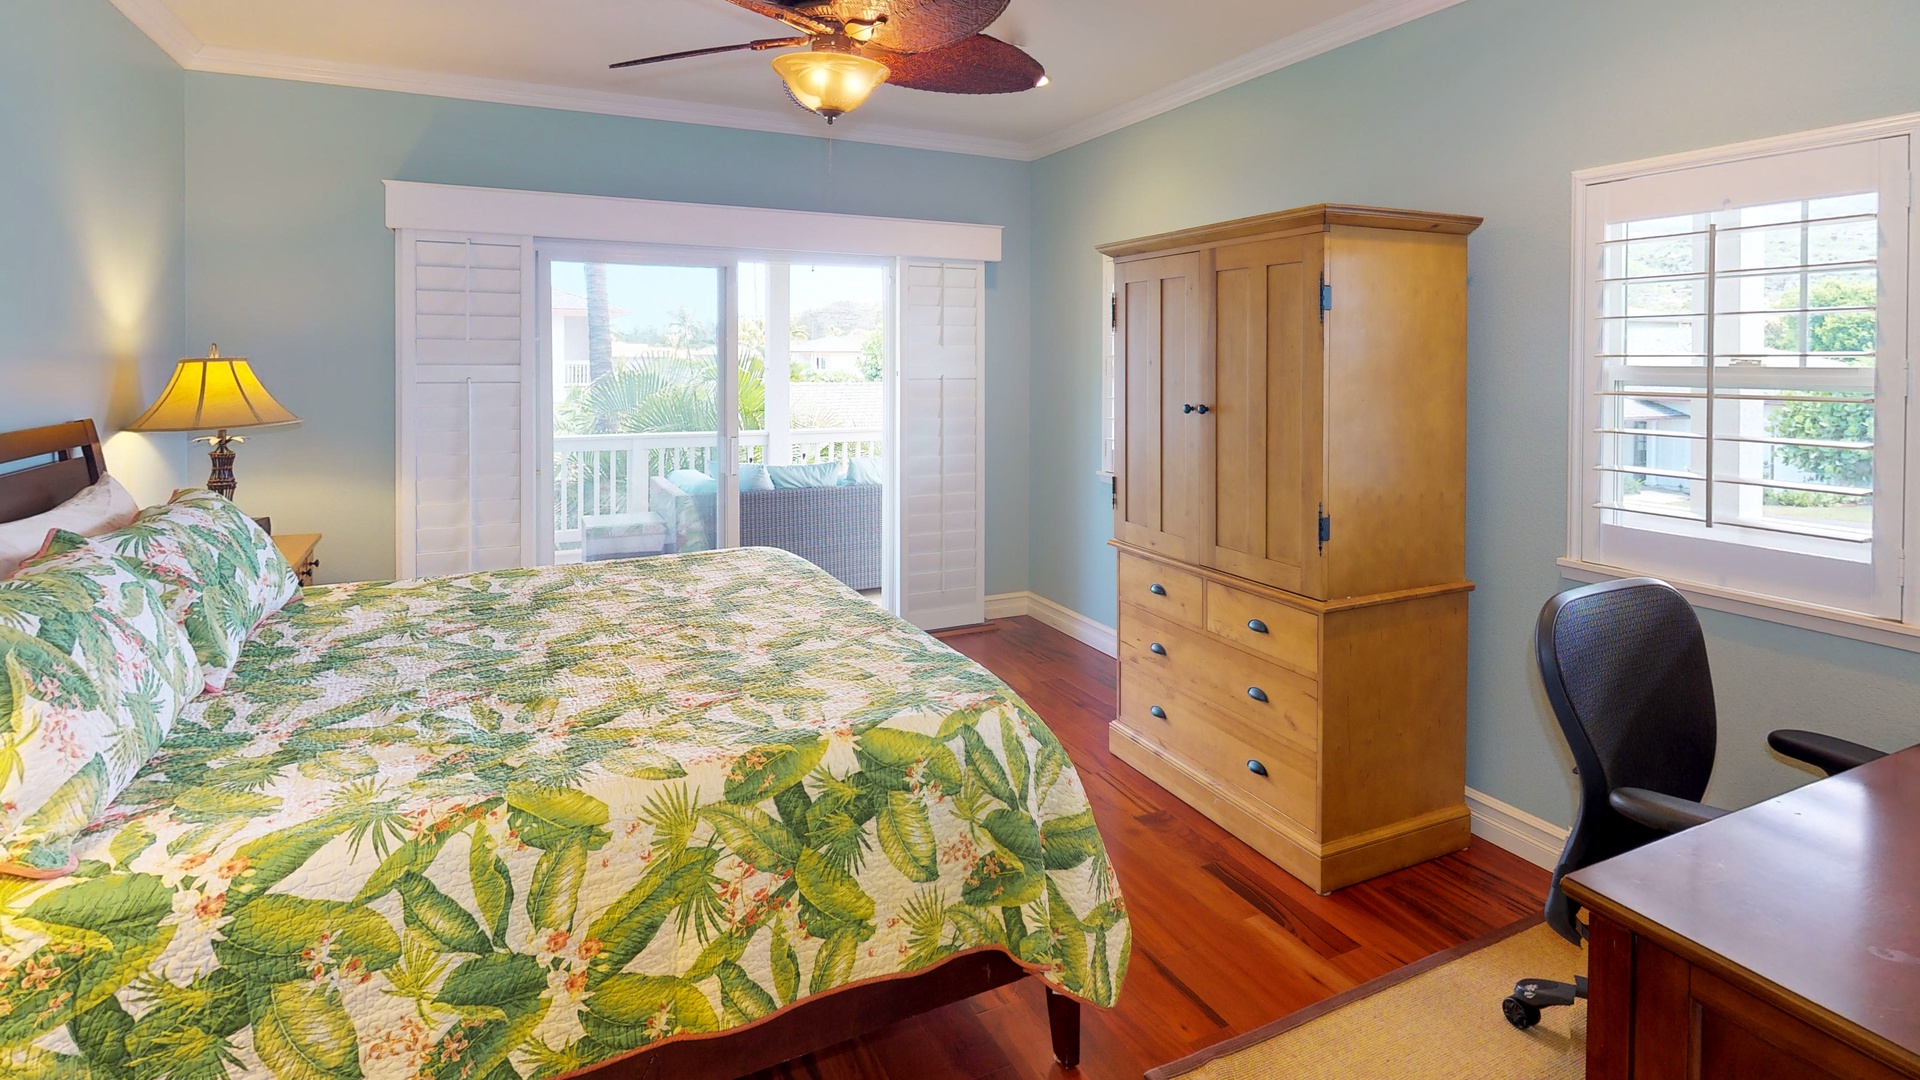 Kapolei Vacation Rentals, Coconut Plantation 1200-4 - The guest room with ceiling fan and private lanai.